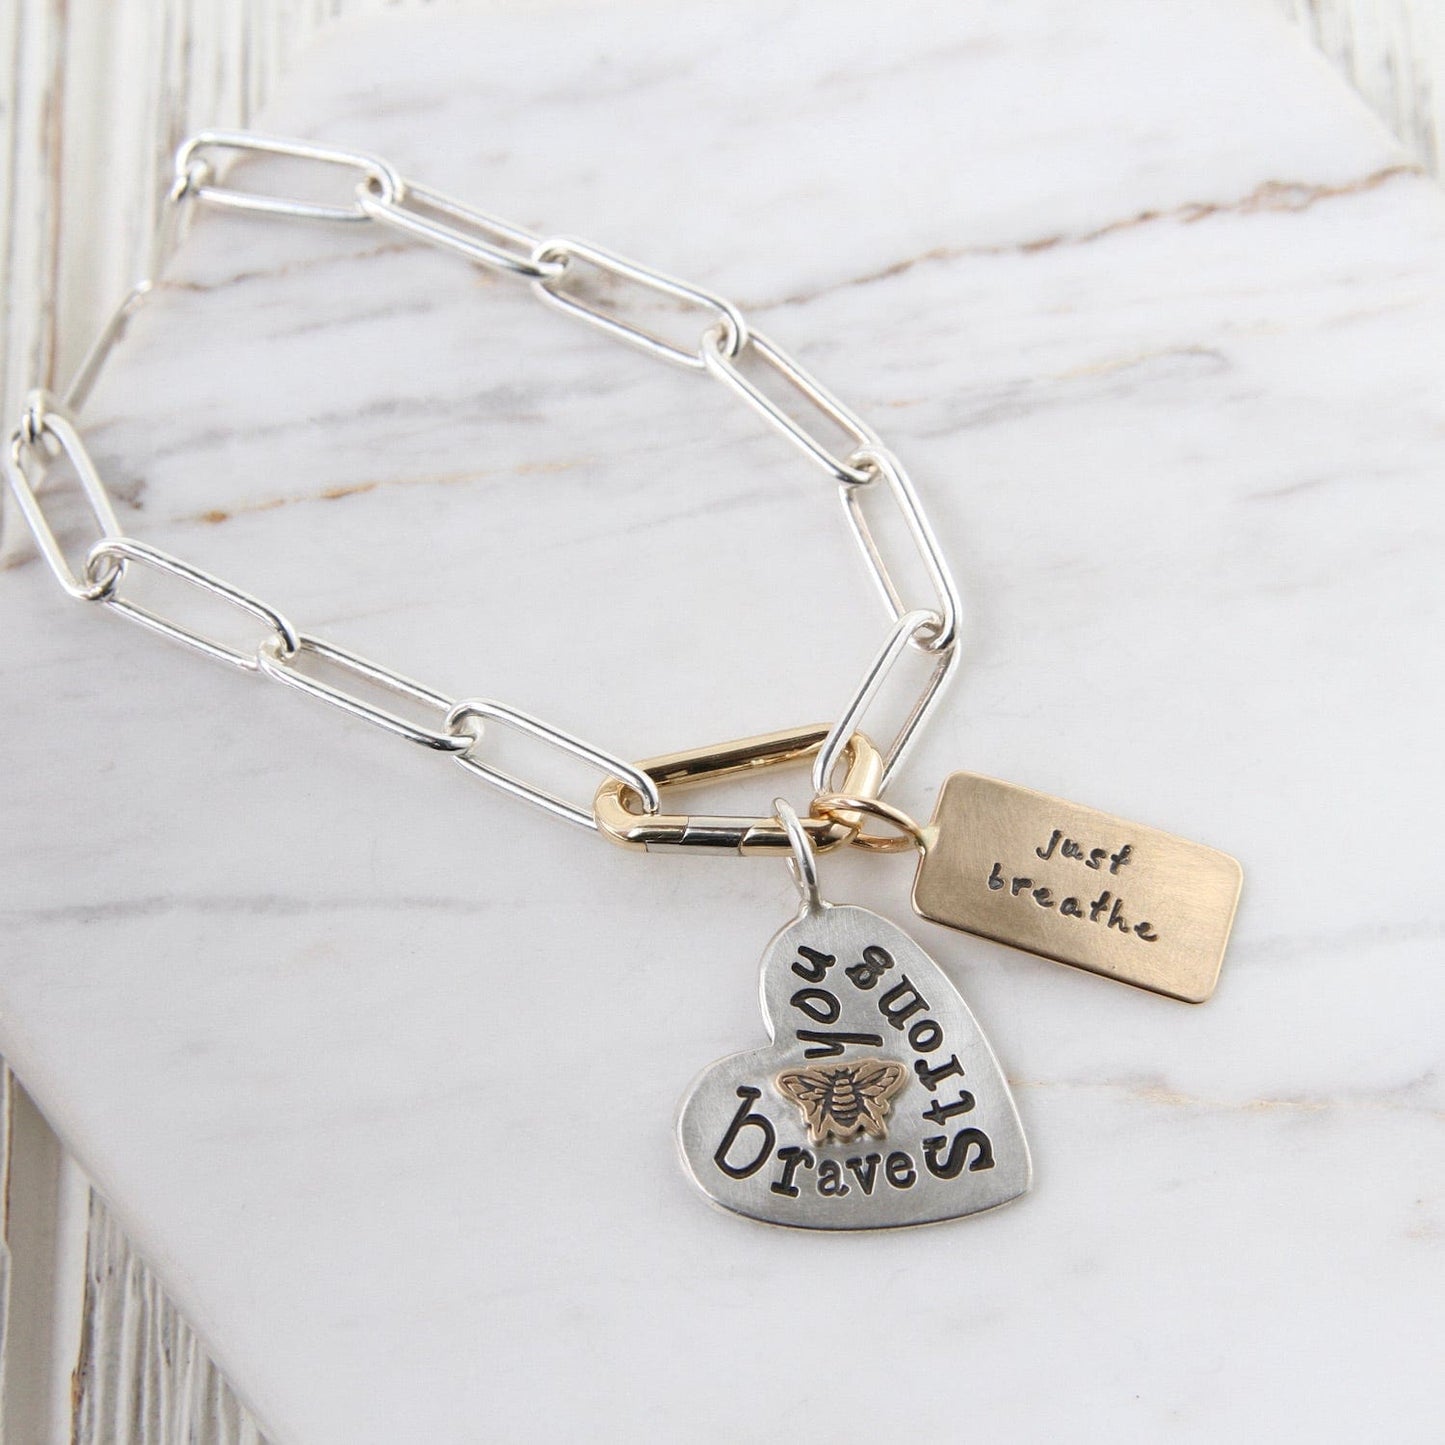 CHM "just breathe" & "you can do this" 14K Gold Charm